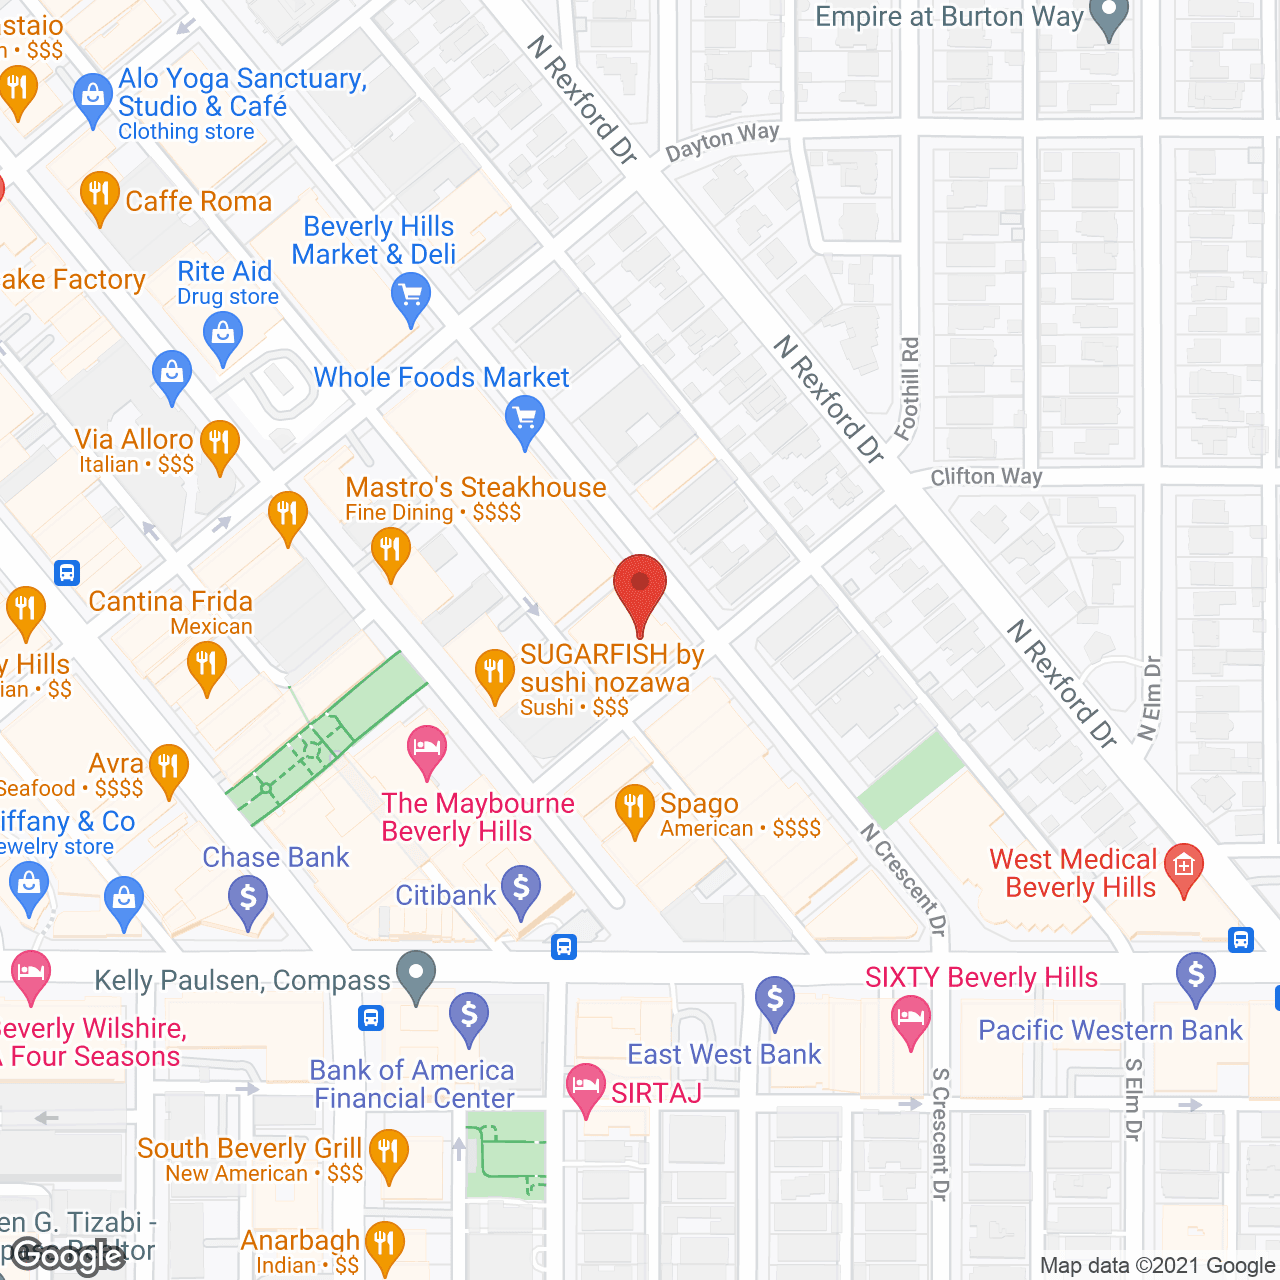 Sunrise of Beverly Hills in google map